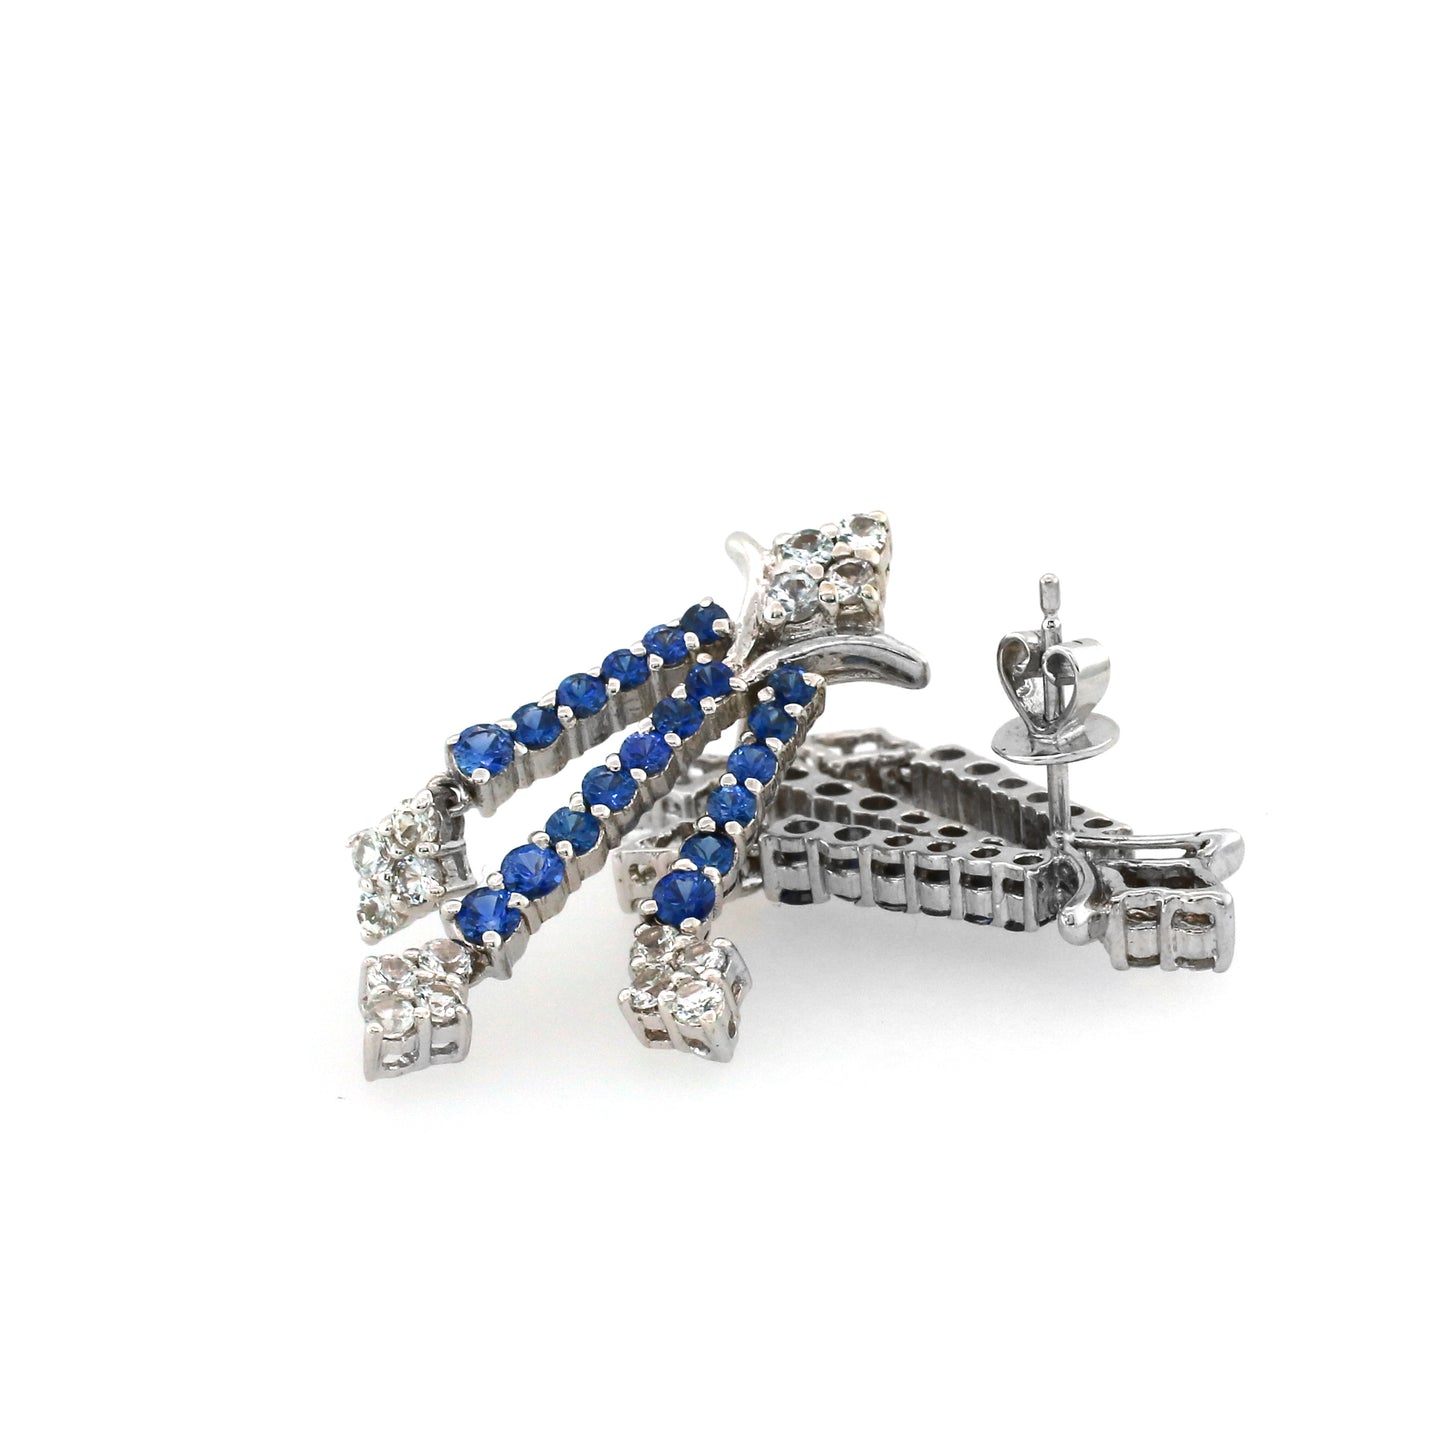 Splendid Pair of 18k White Gold Earring with Royal Blue Sapphire and White Sapphire